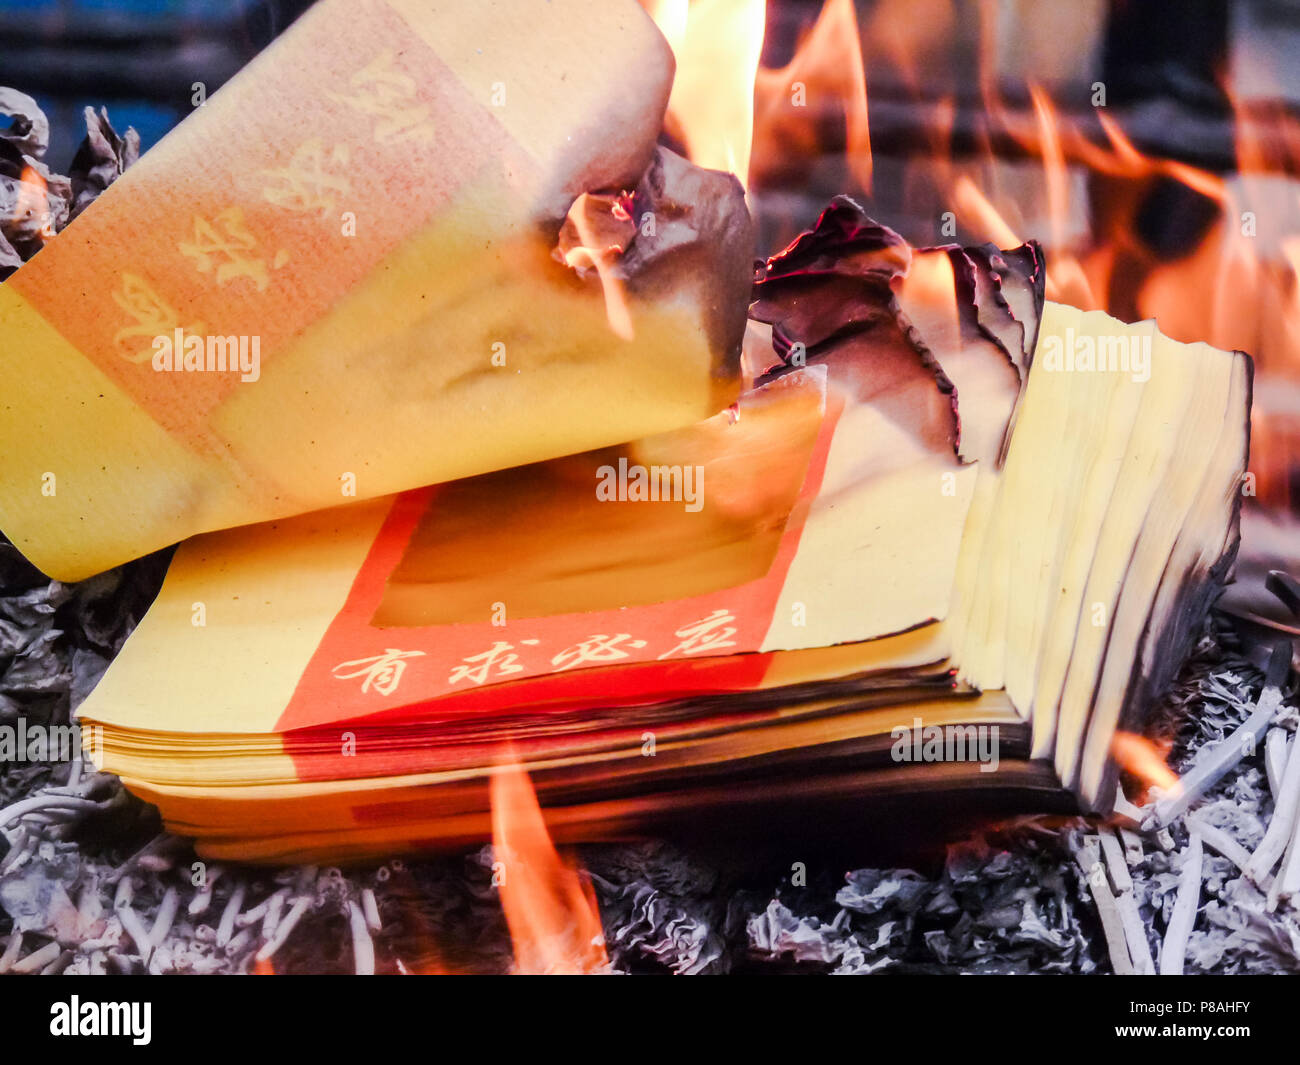 Burning Chinese joss paper or ghost money at a temple during Chinese lunar new year. The paper says ' all request will be granted'. Stock Photo